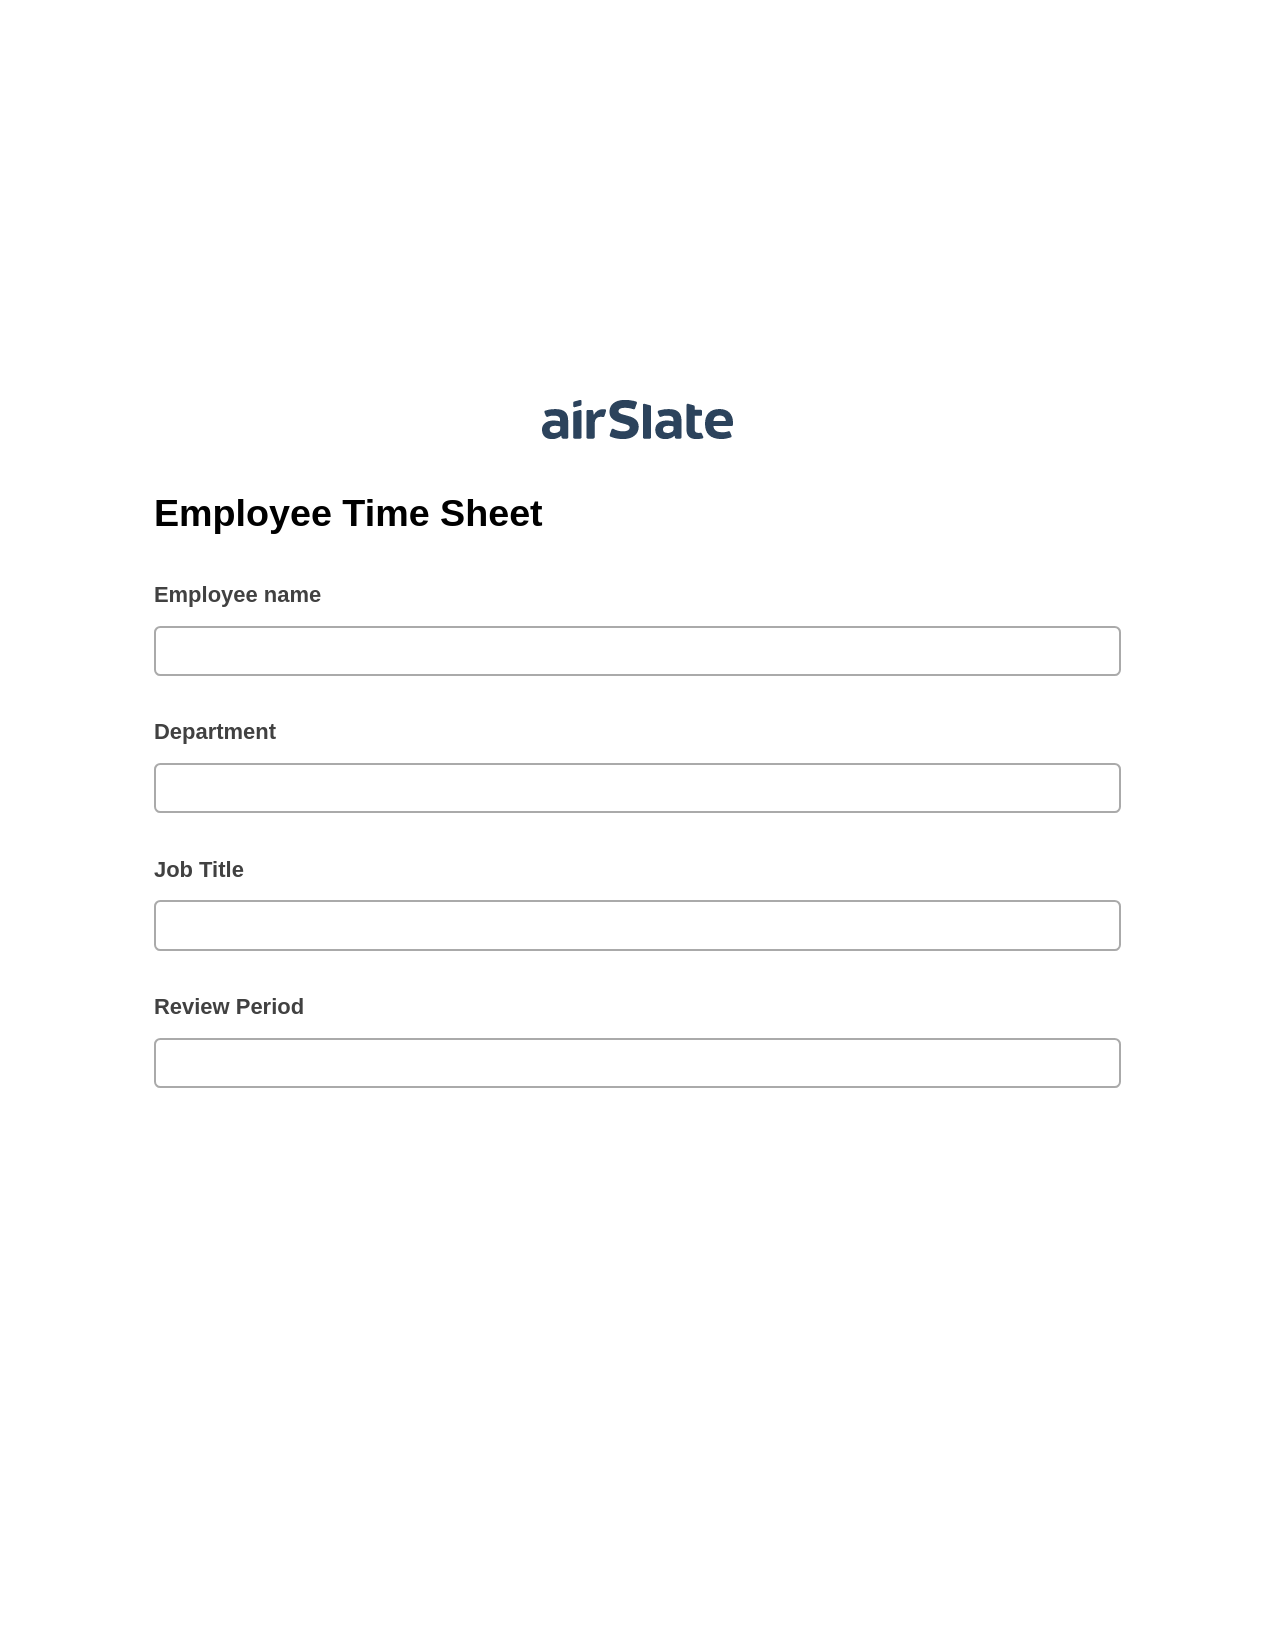 Employee Time Sheet Pre-fill from Office 365 Excel Bot, Custom Field's Value Bot, Export to Smartsheet